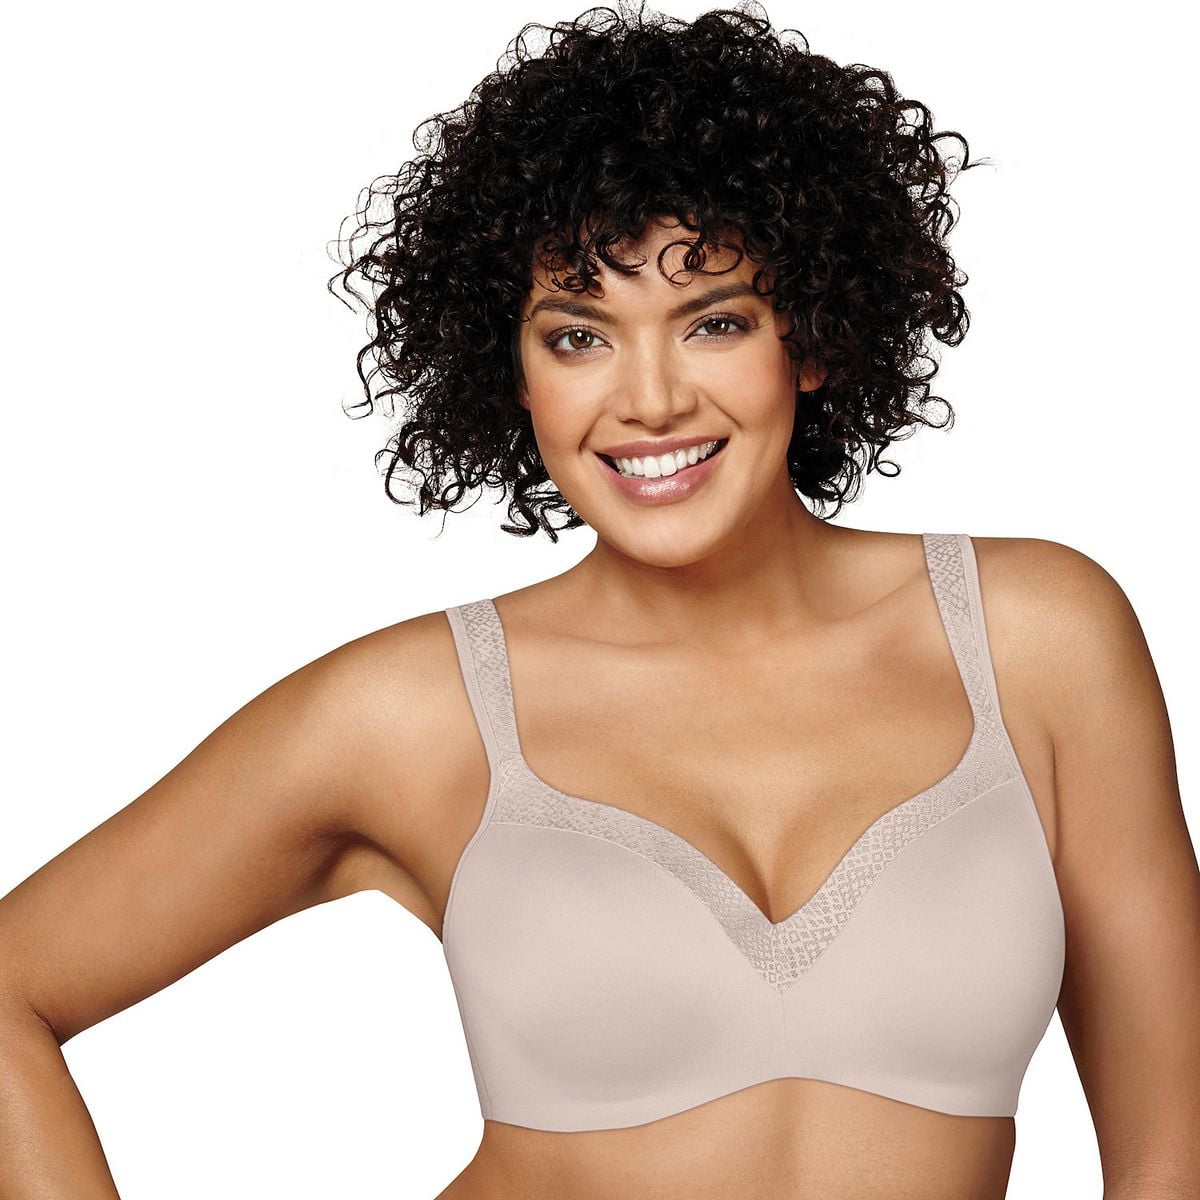 City Bra Black Half Embroidered Breathable Cup Underwired Full Coverage 32 34 42